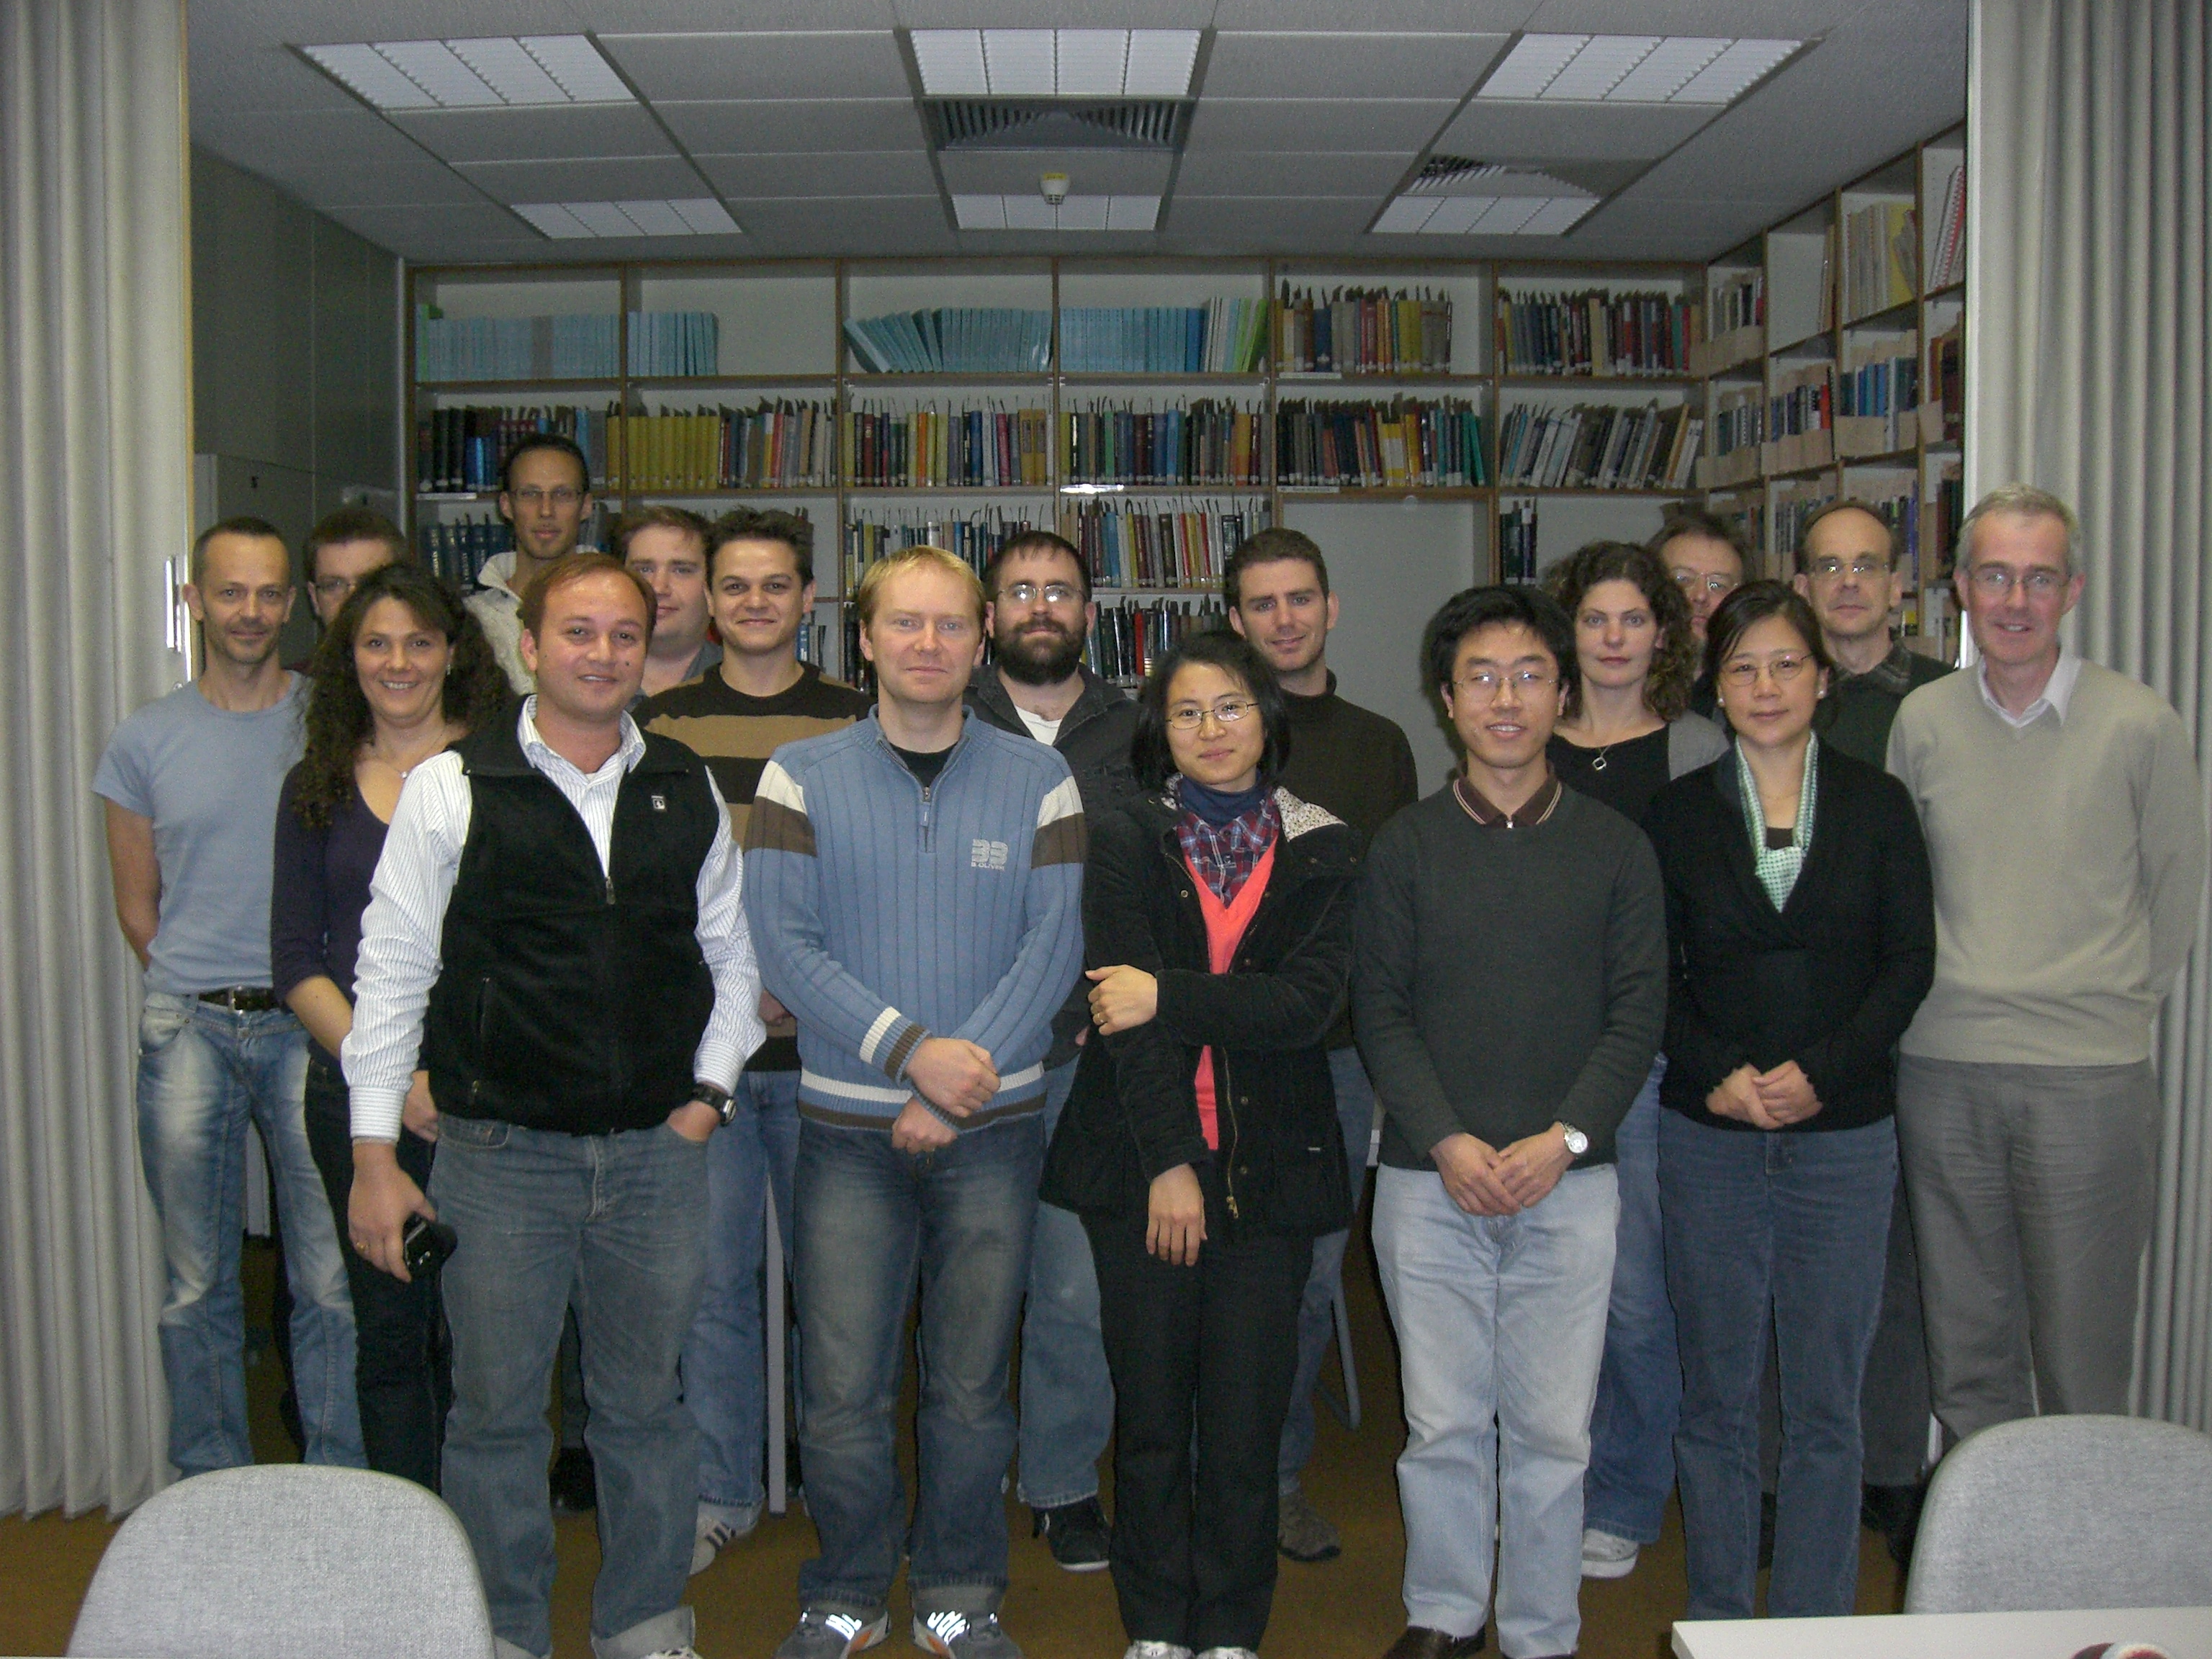 Training course attendees - 2009